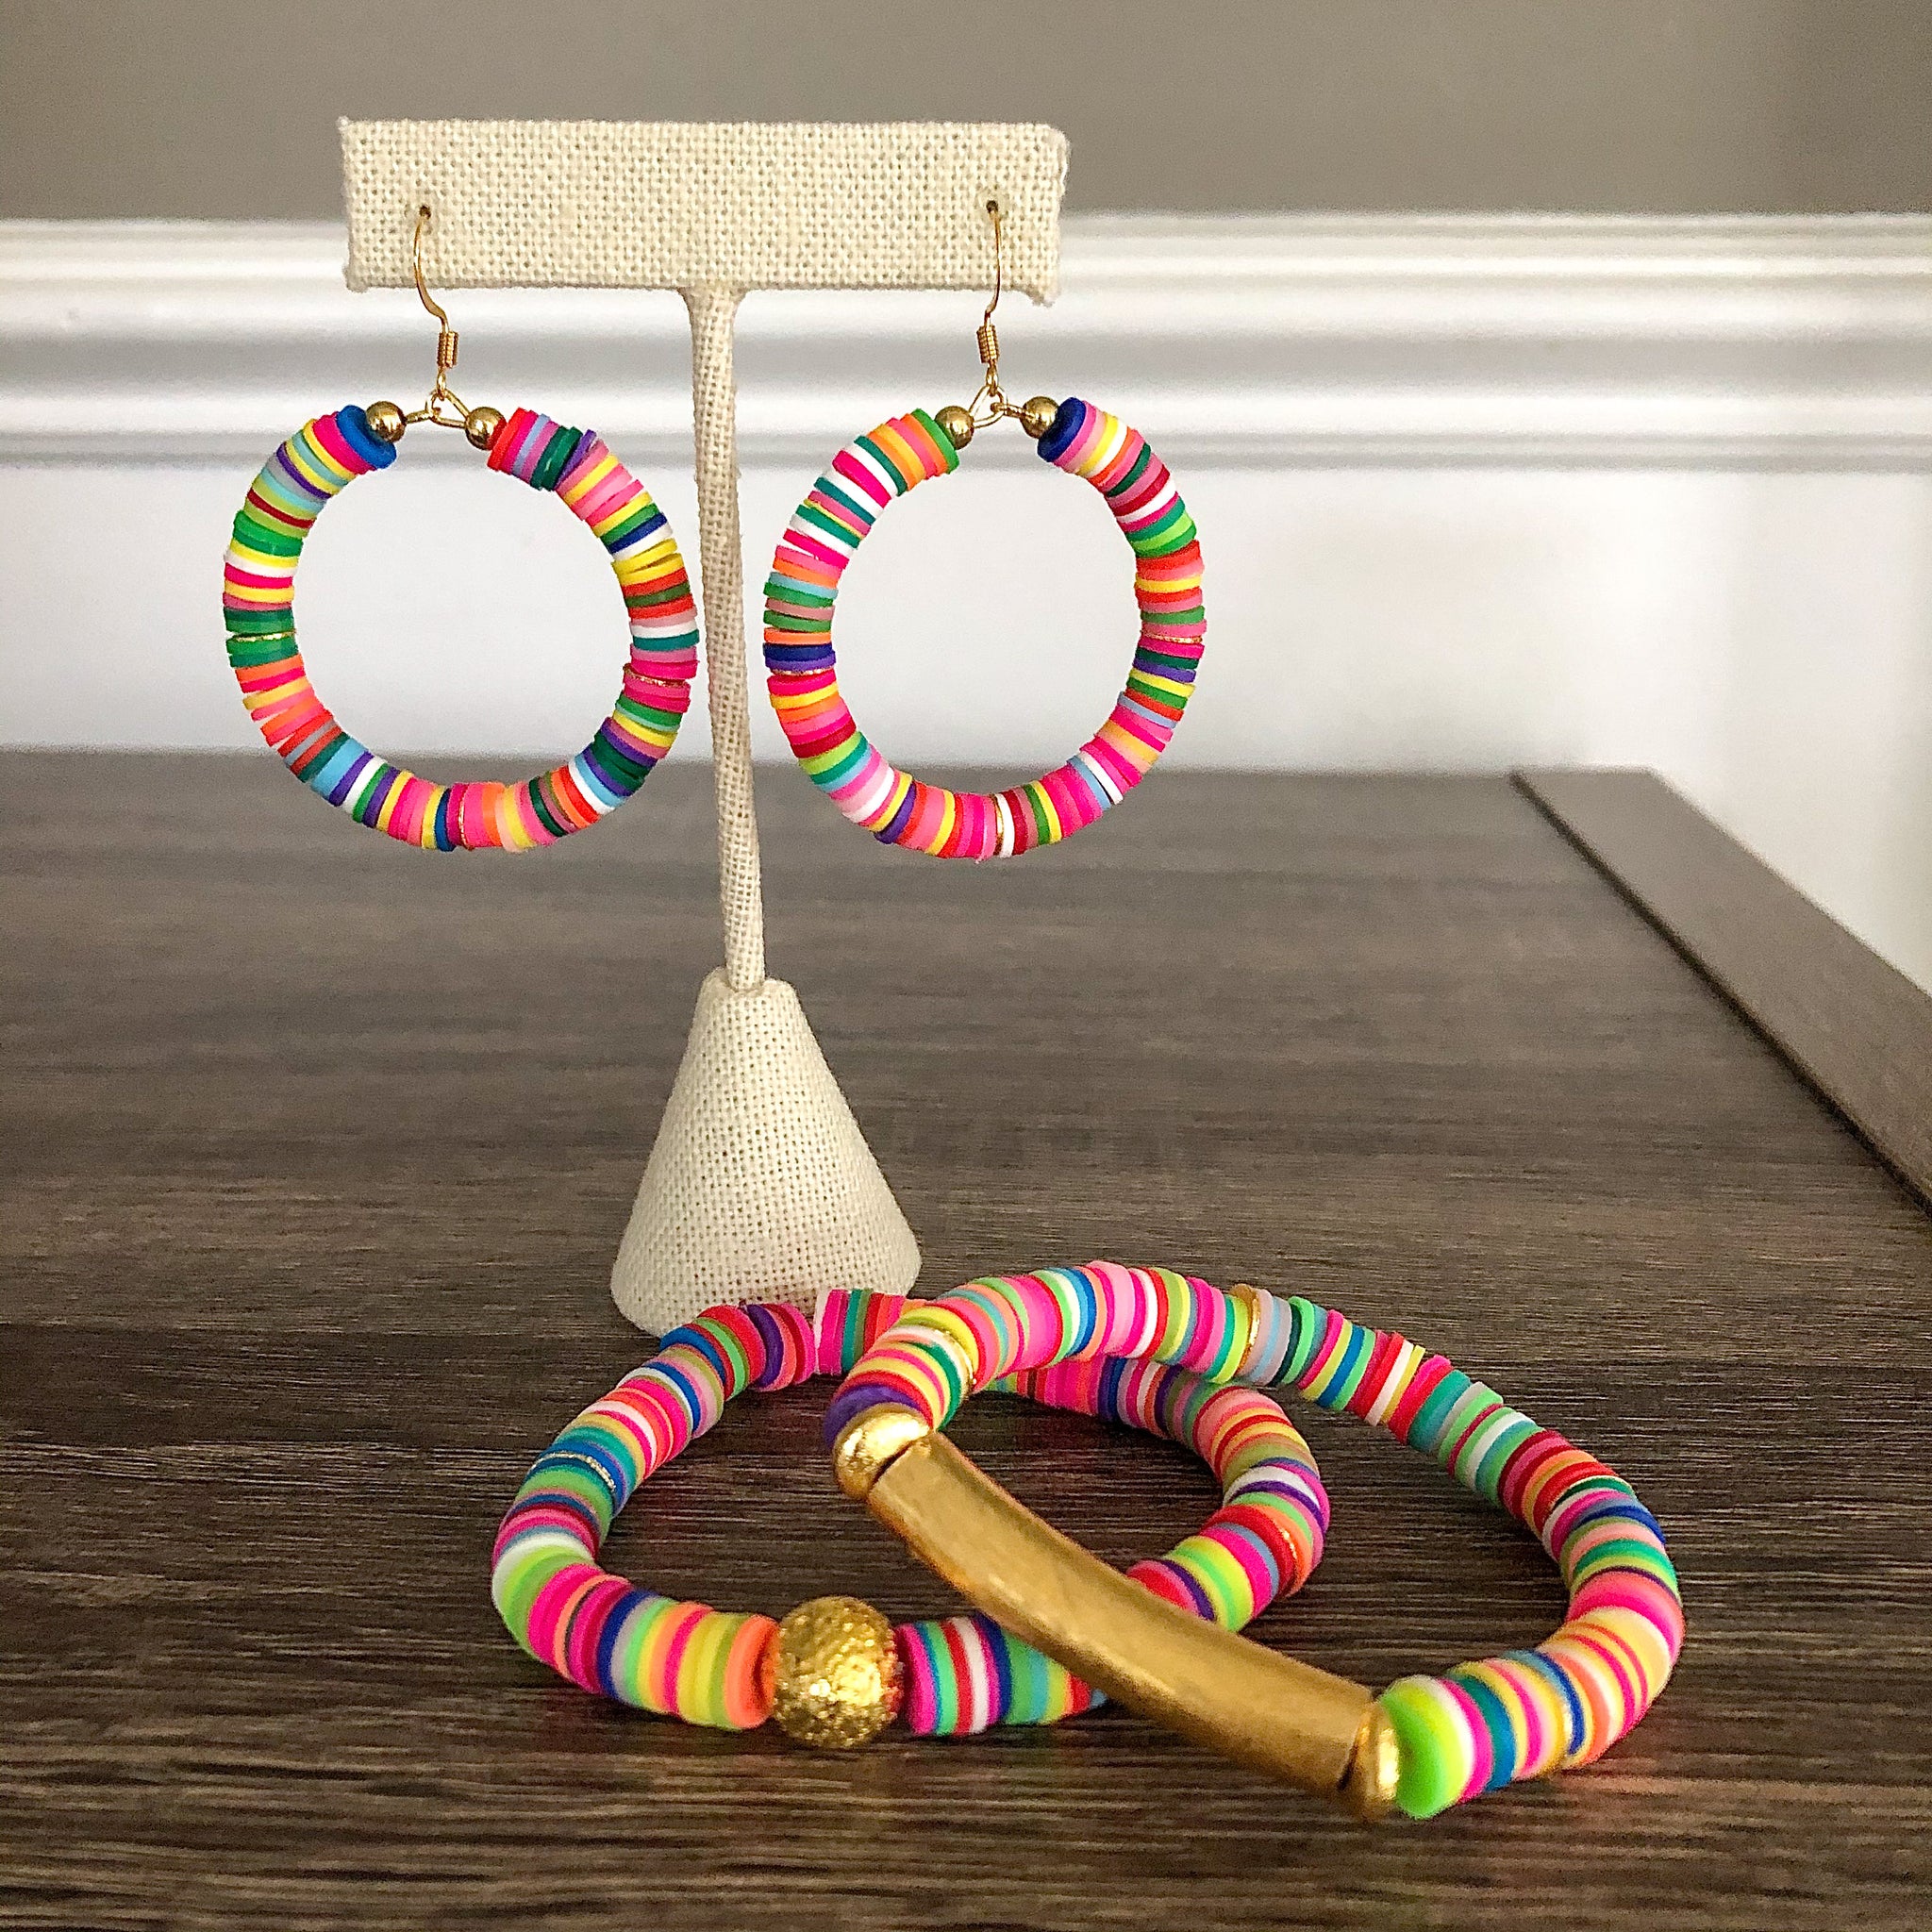 The Hailey Collection - Rainbow Earrings and Bracelet